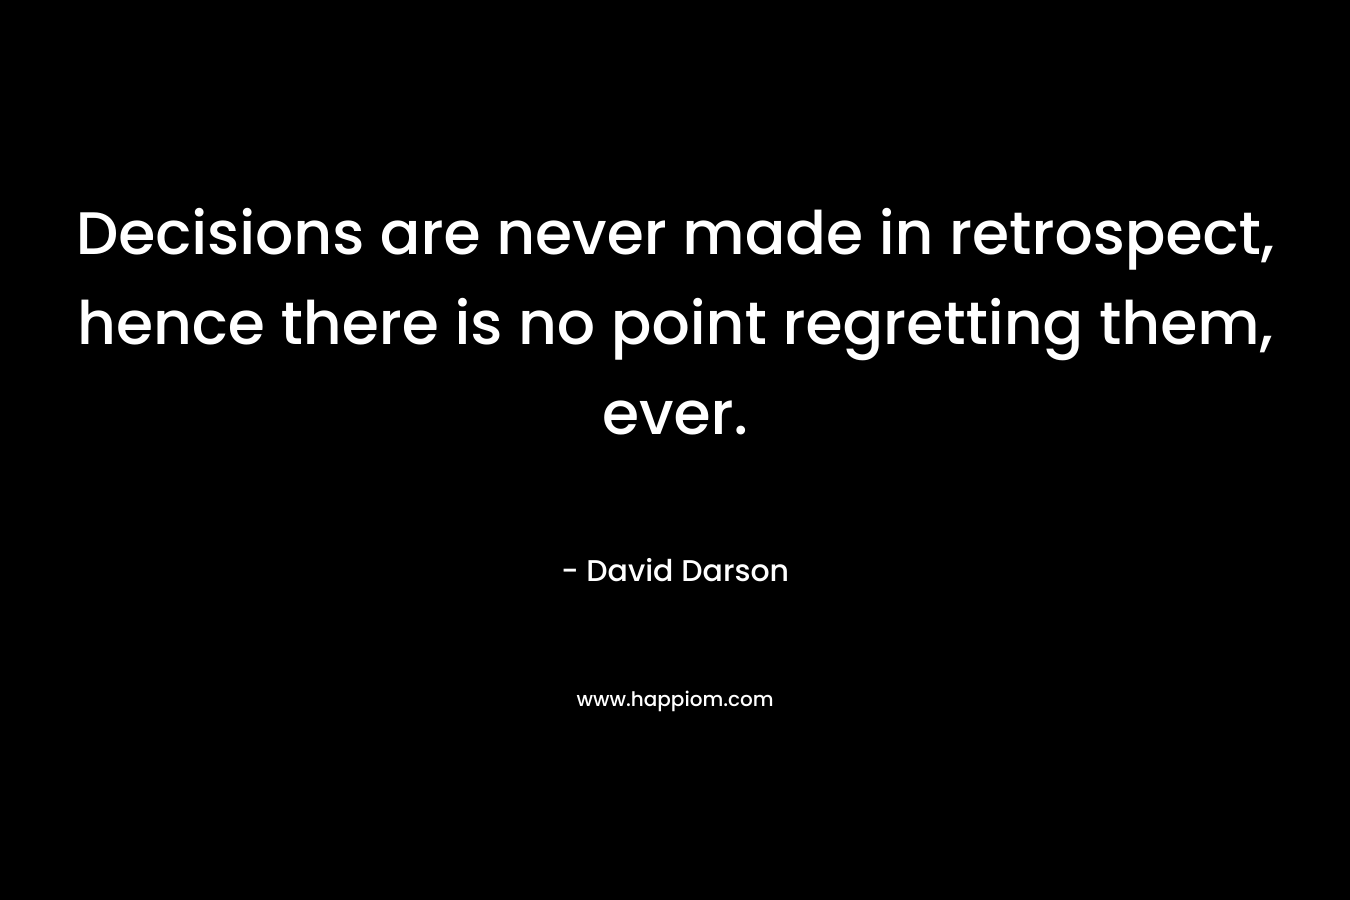 Decisions are never made in retrospect, hence there is no point regretting them, ever.